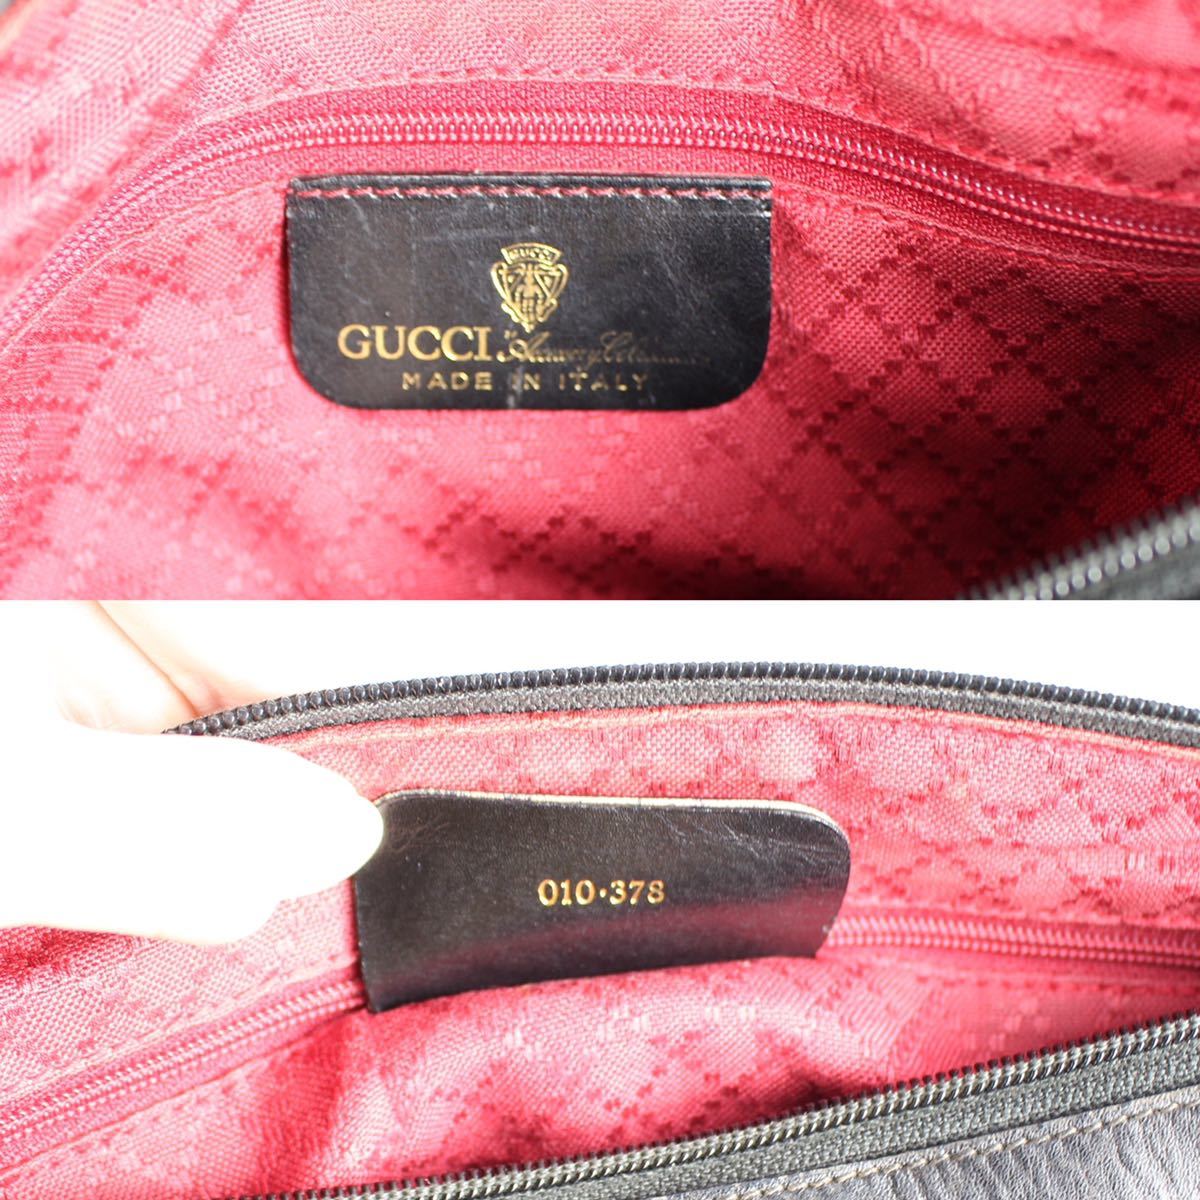 OLD GUCCI GG PATTERNED SHERRY LINE SHOULDER BAG MADE IN ITALY/オールドグッチGG柄シェリーラインショルダーバッグ